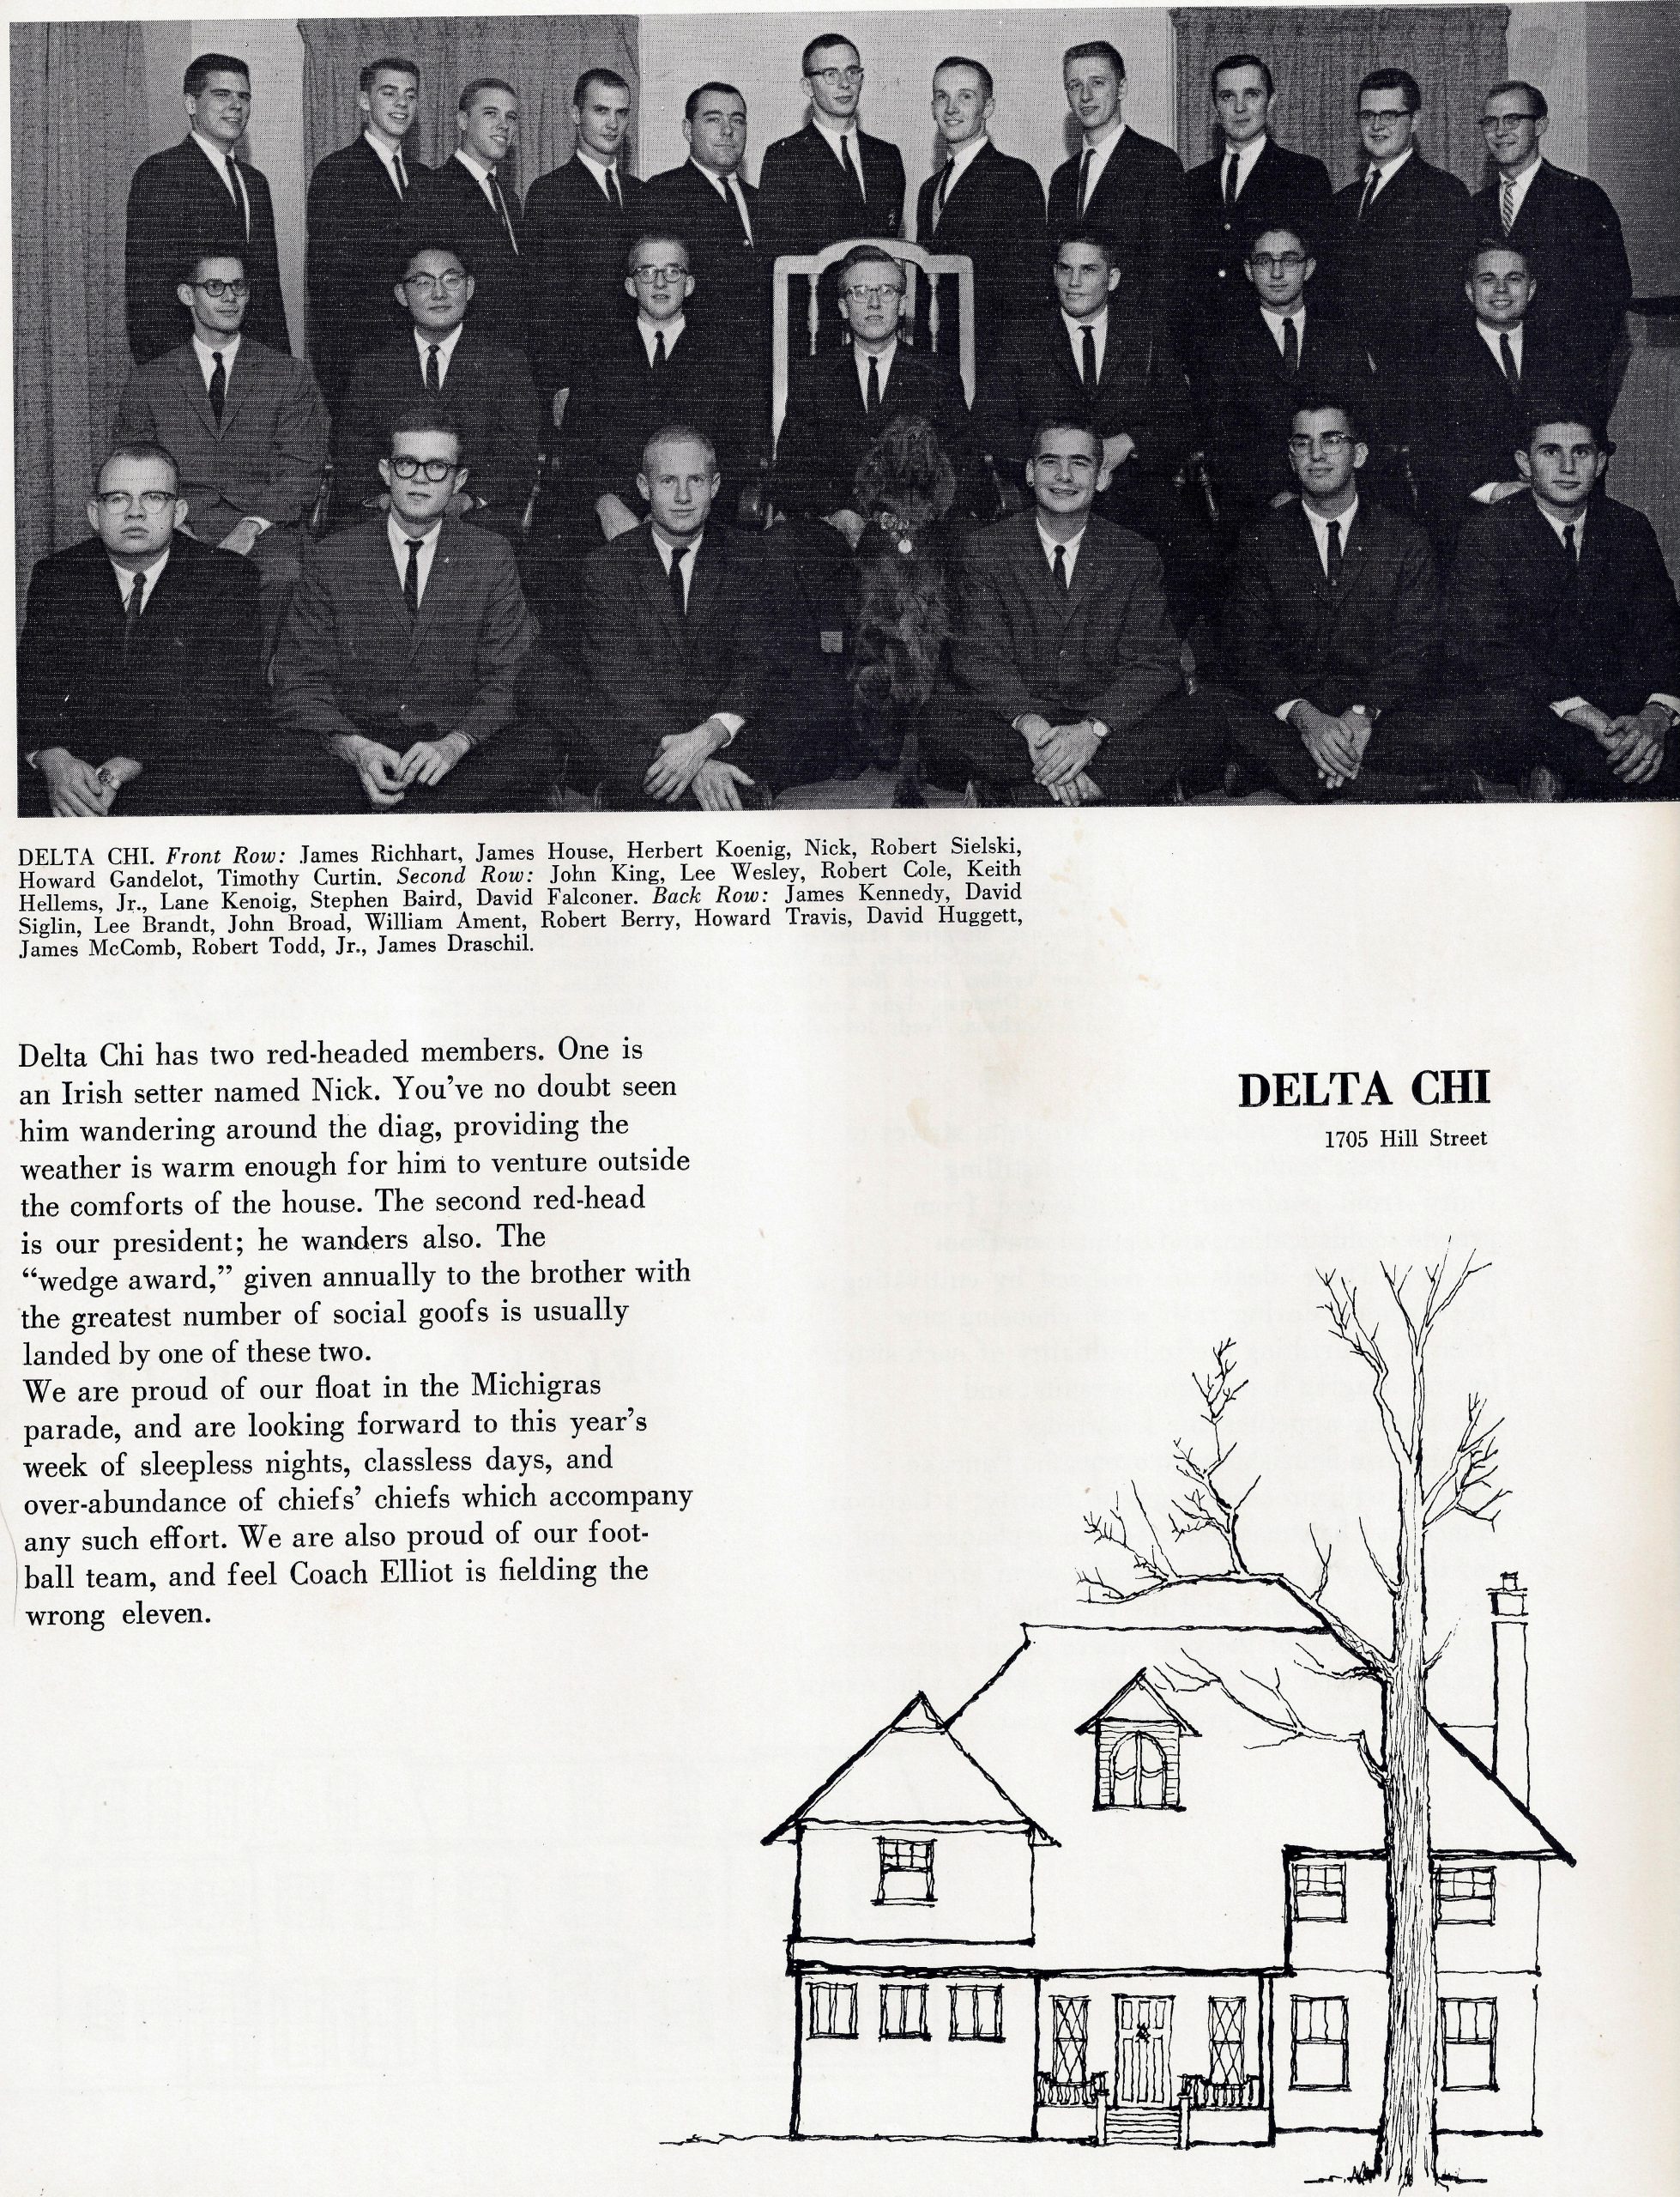 Throwback to Delta Chi in 1962